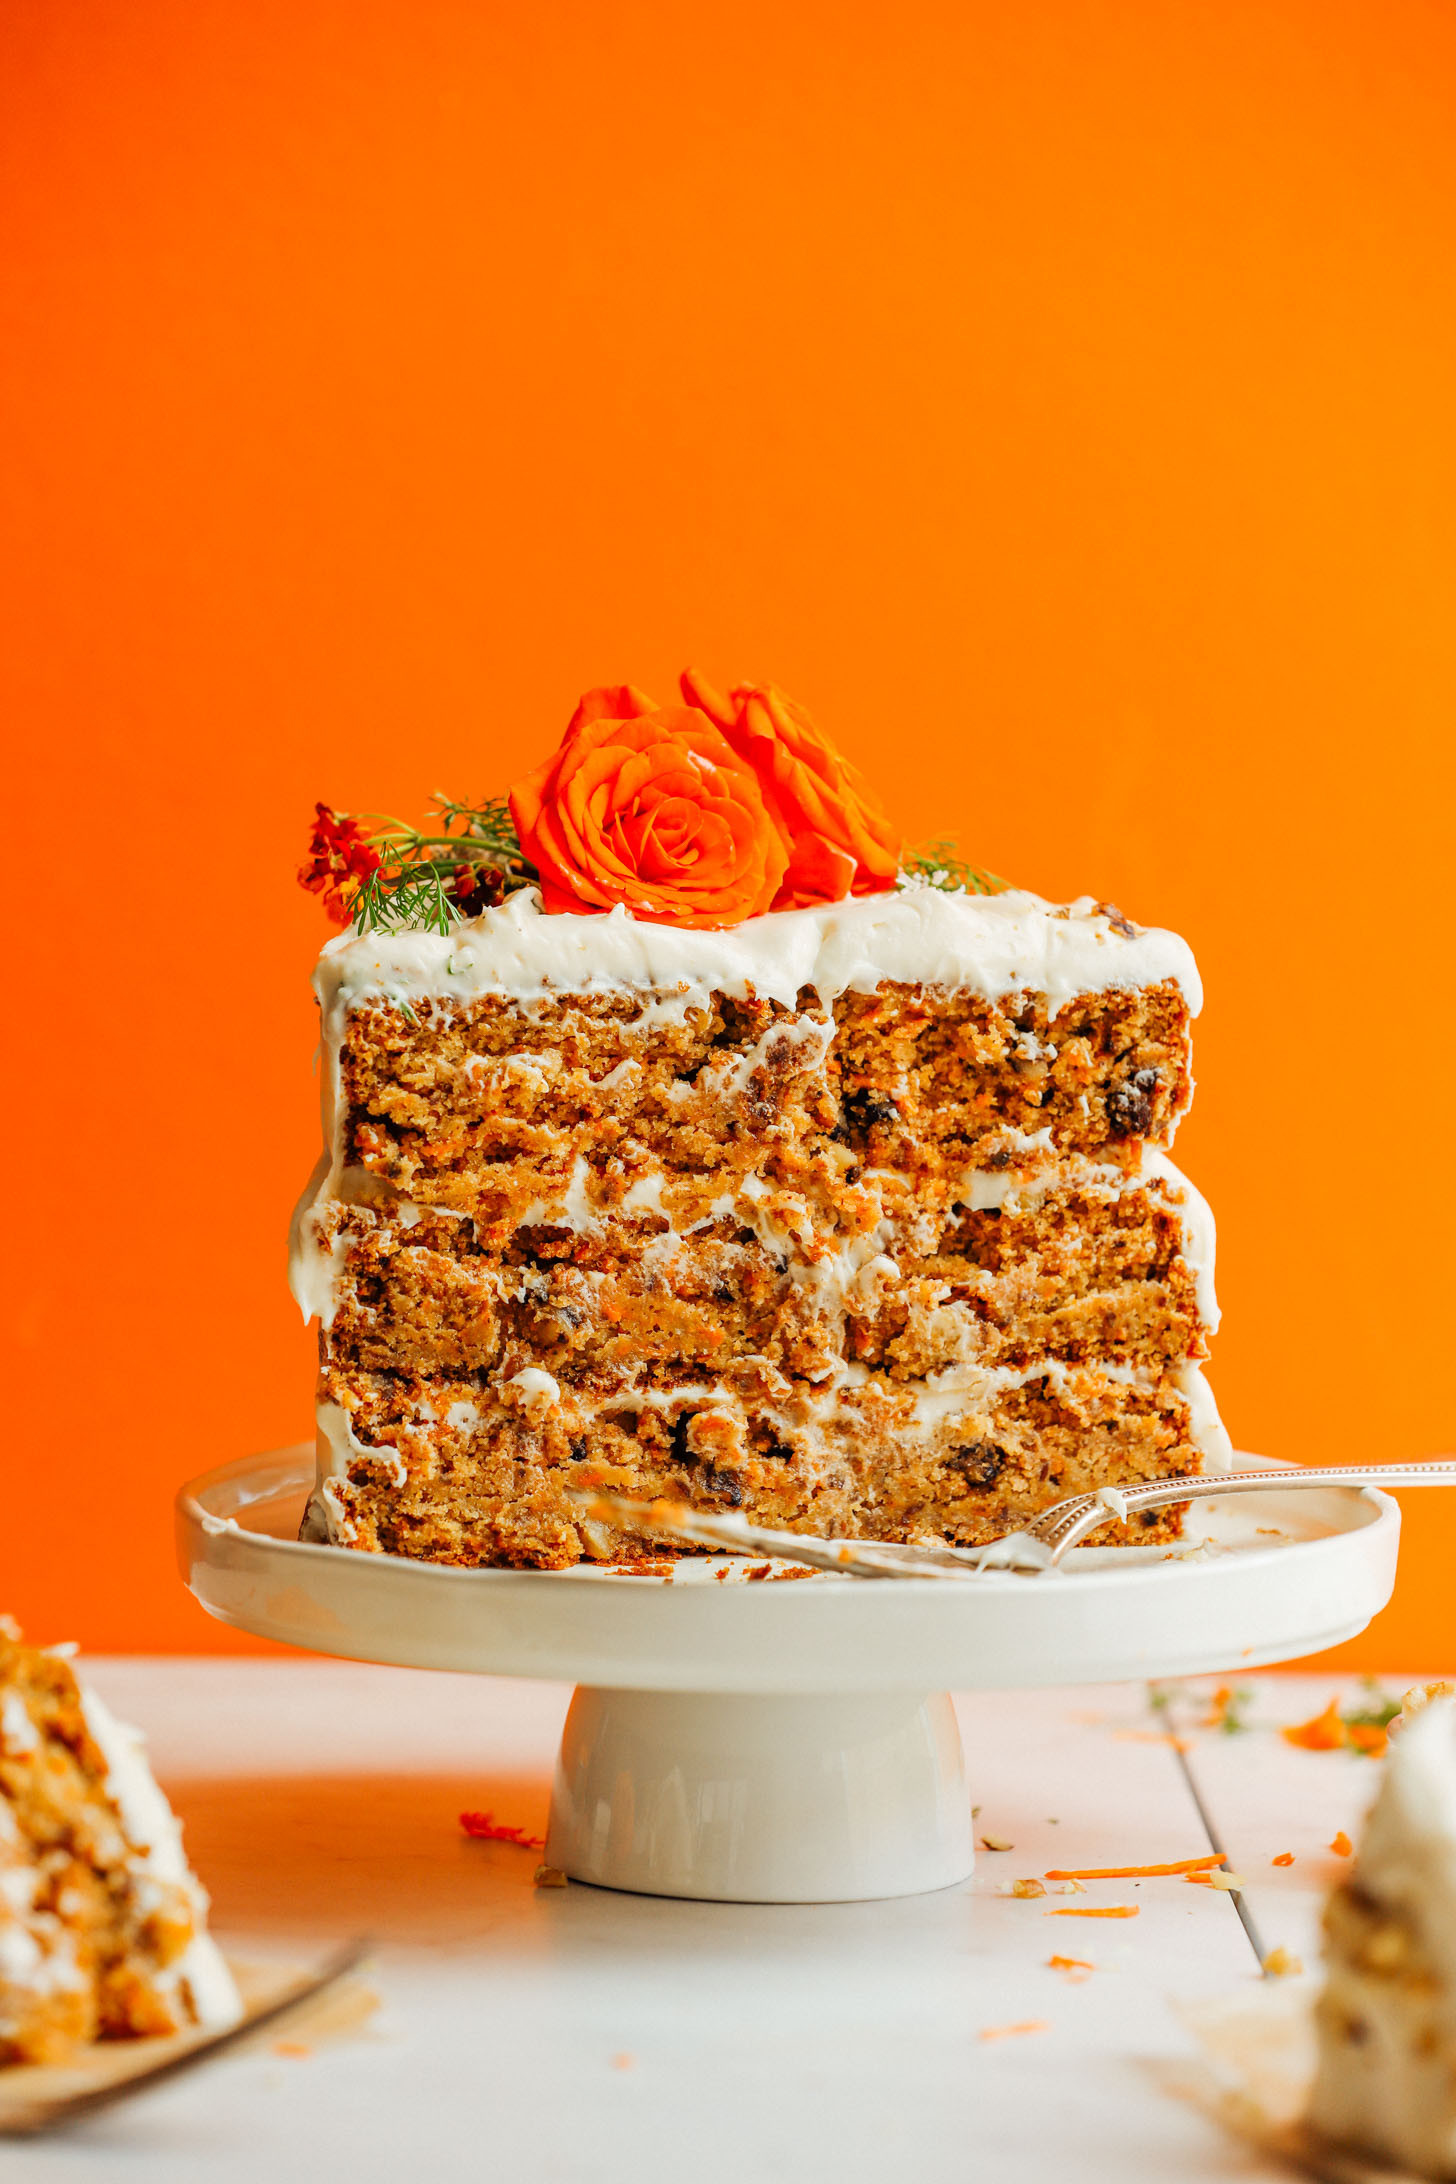 Best Vegan Carrot Cake Recipe
 carrot cake with crushed pineapple and coconut recipe